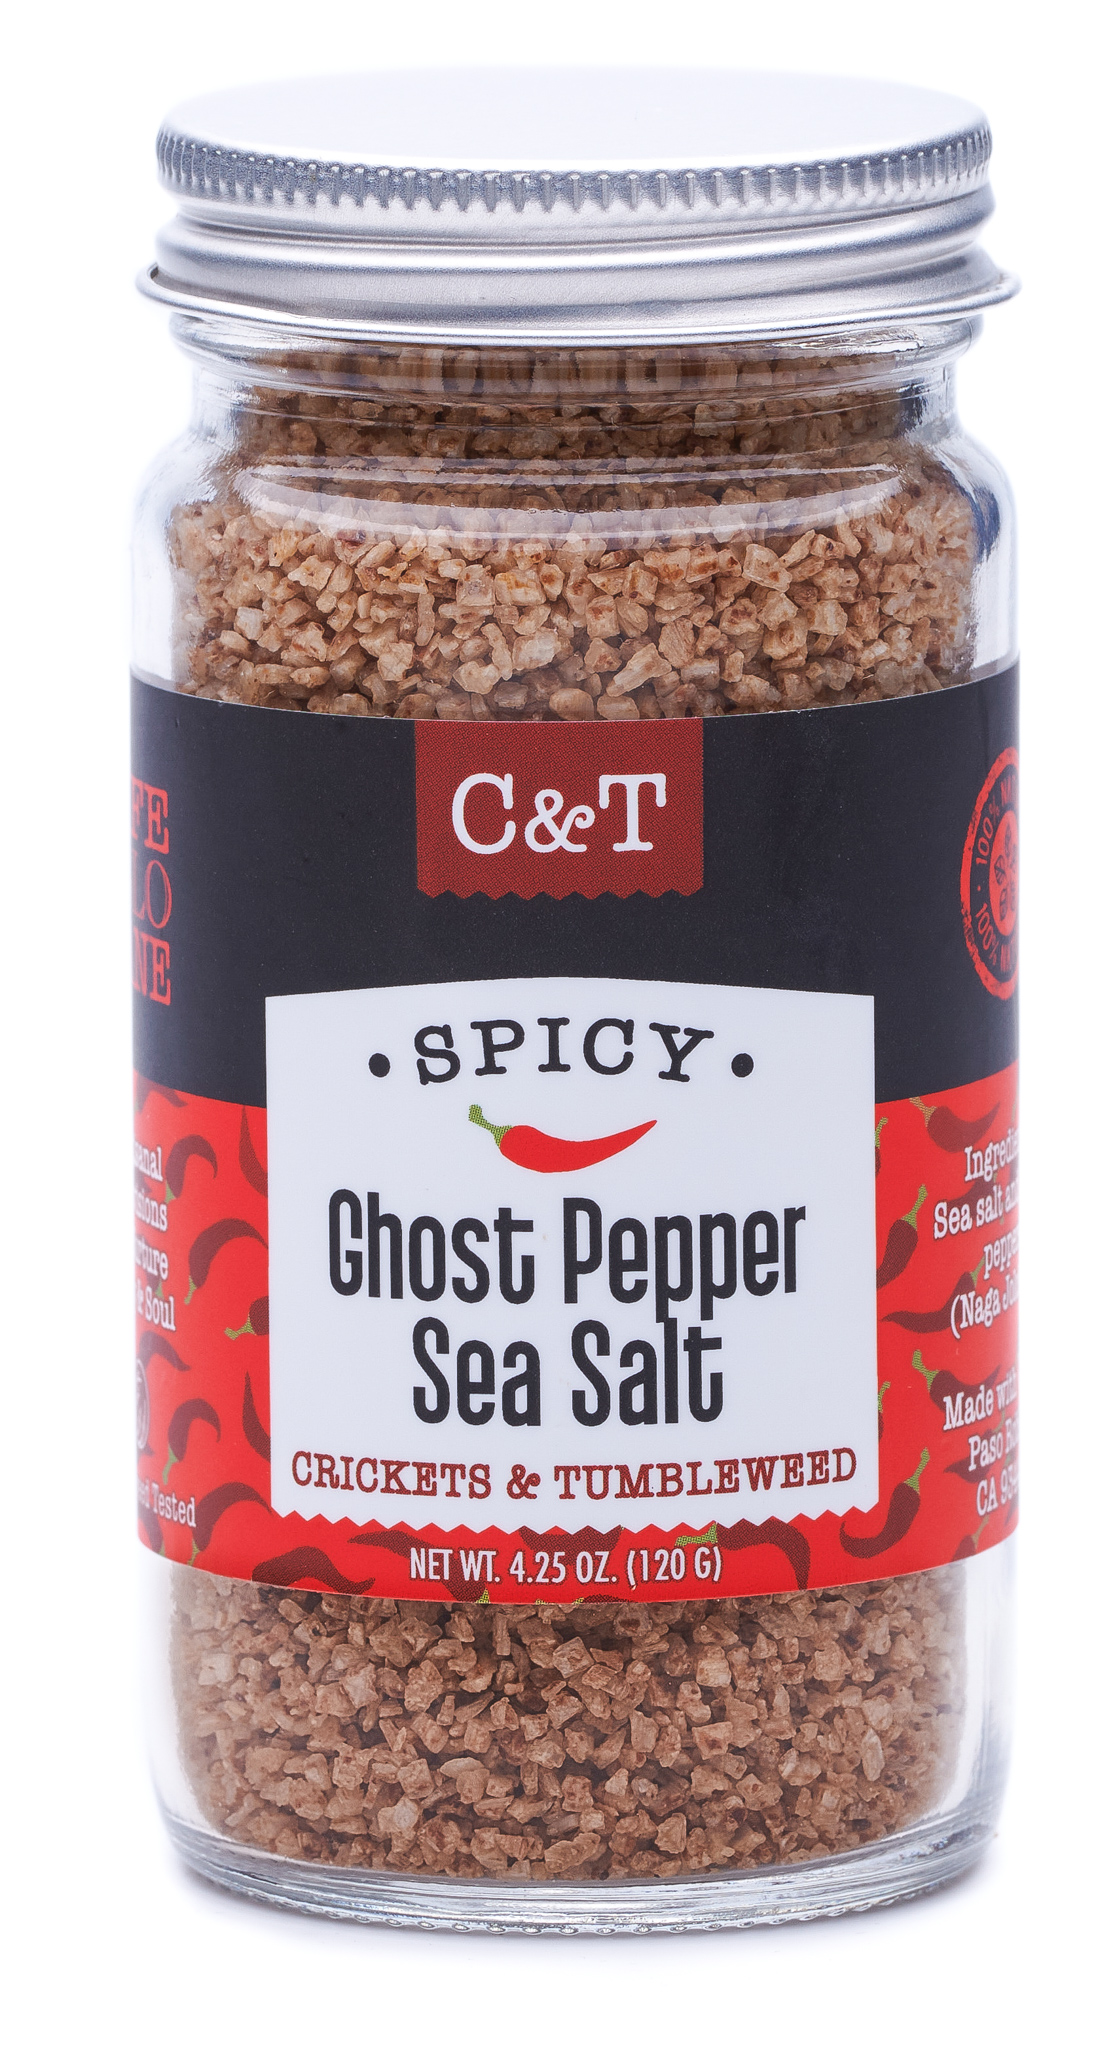 Product Image for C&T Sea Salt Ghost Pepper